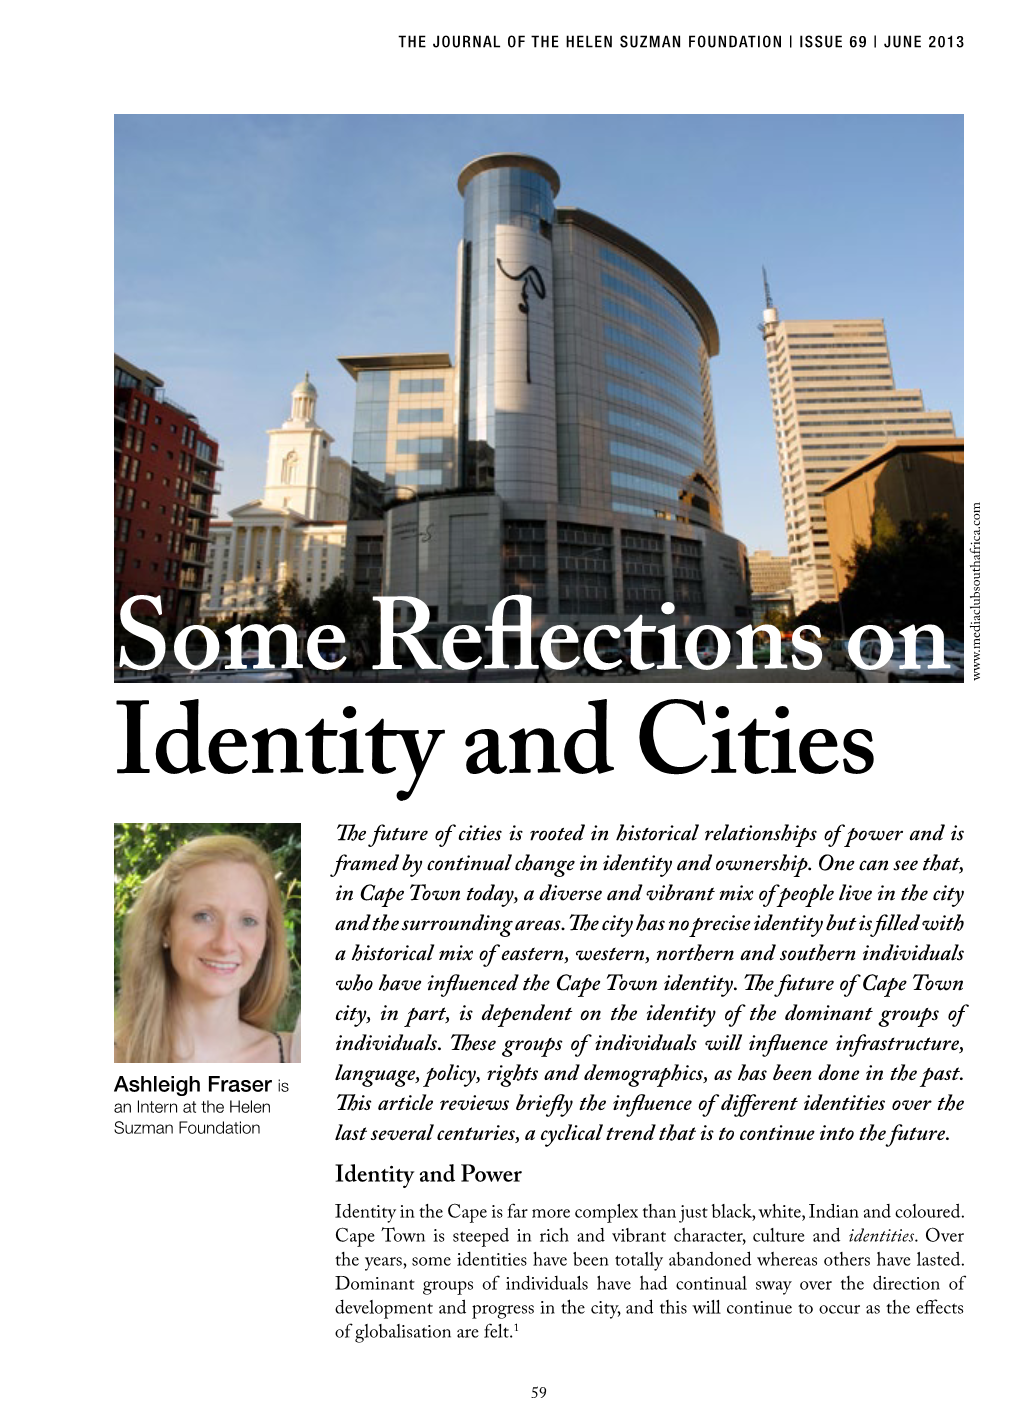 Some Reflections on Identity and Cities